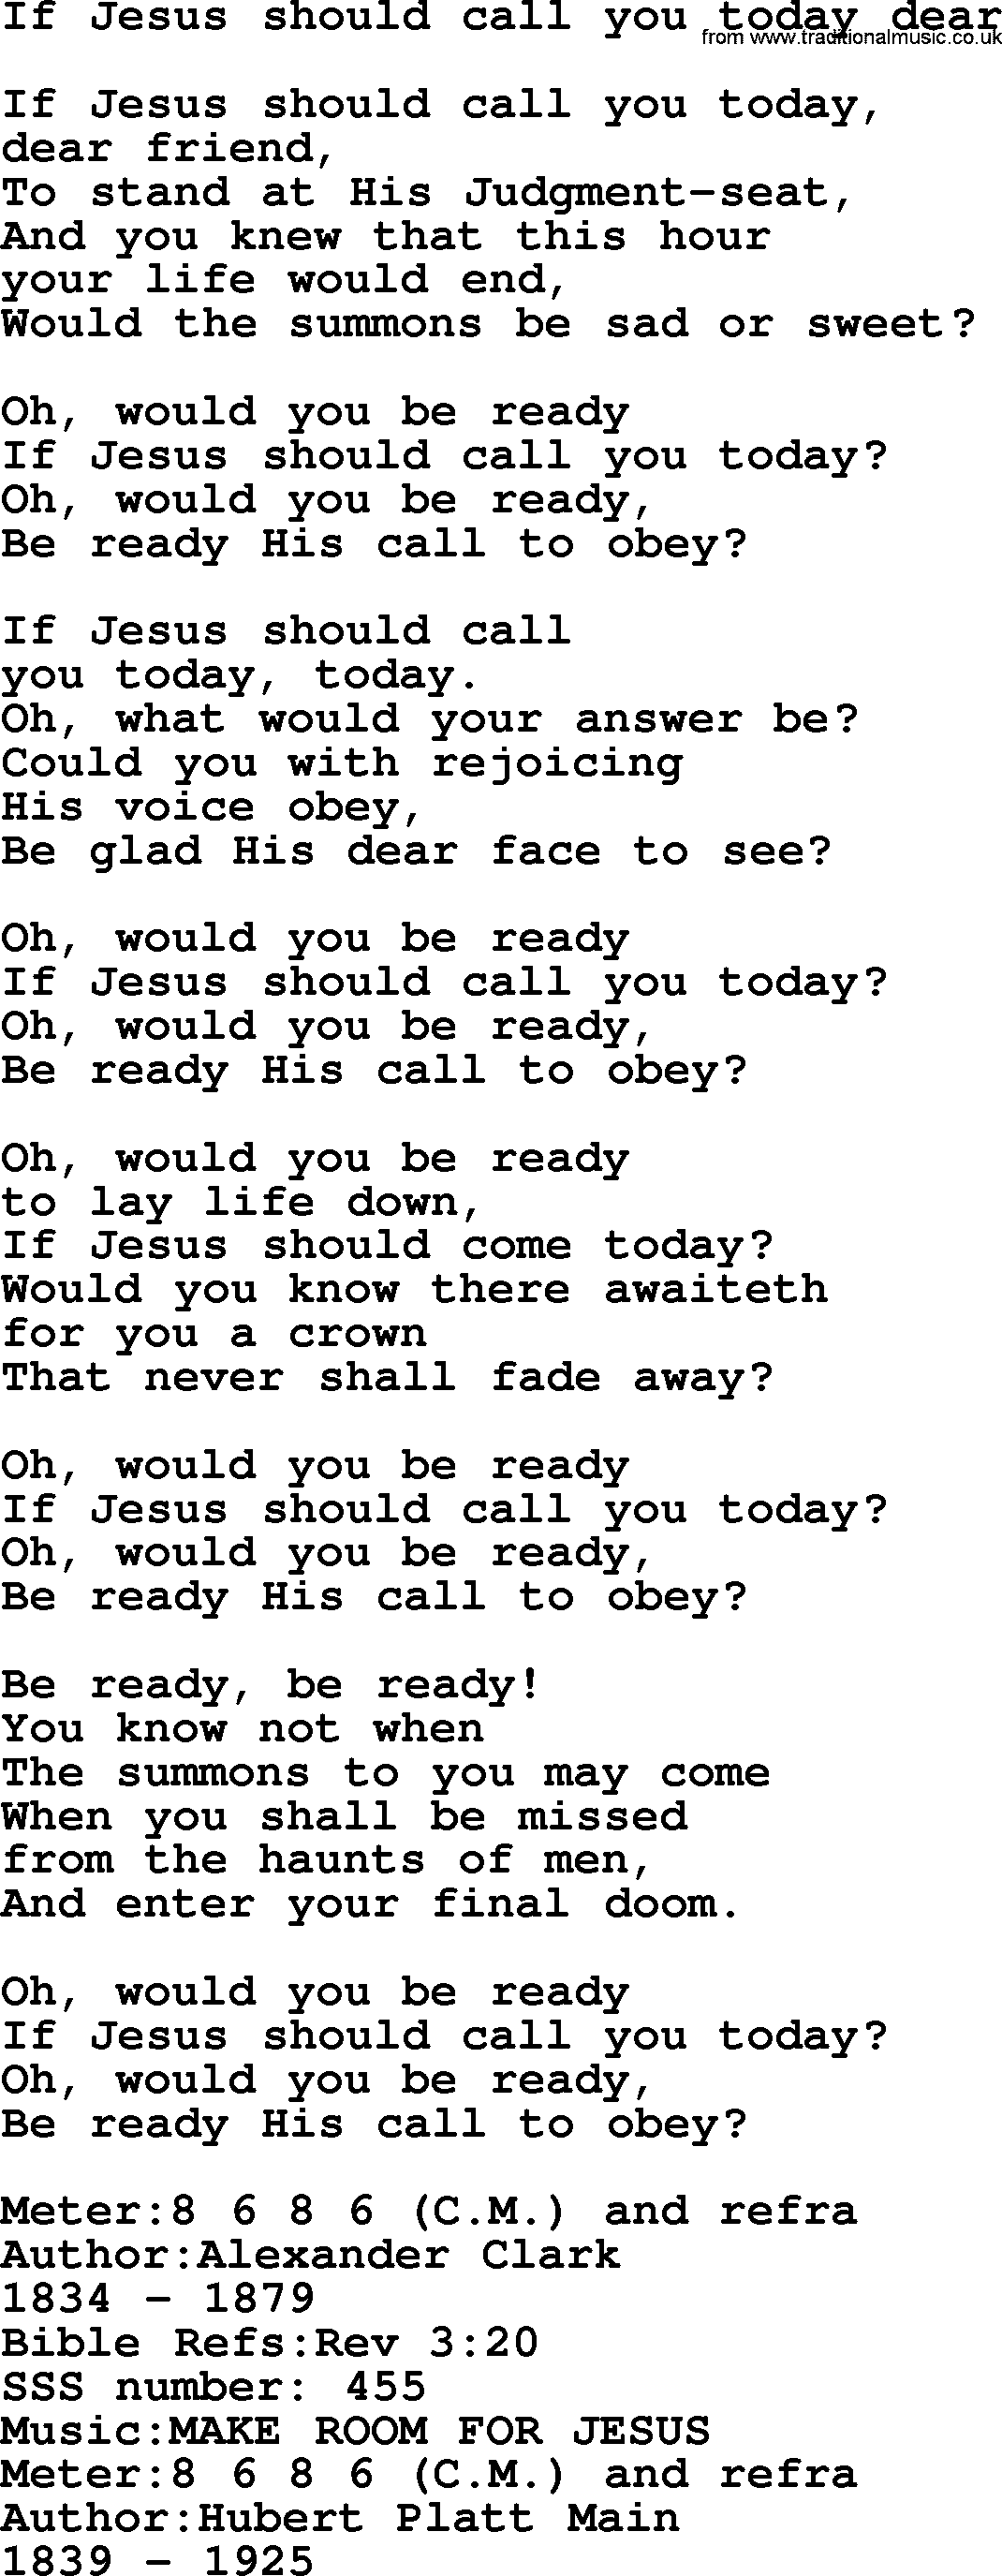 Sacred Songs and Solos complete, 1200 Hymns, title: If Jesus Should Call You Today Dear, lyrics and PDF